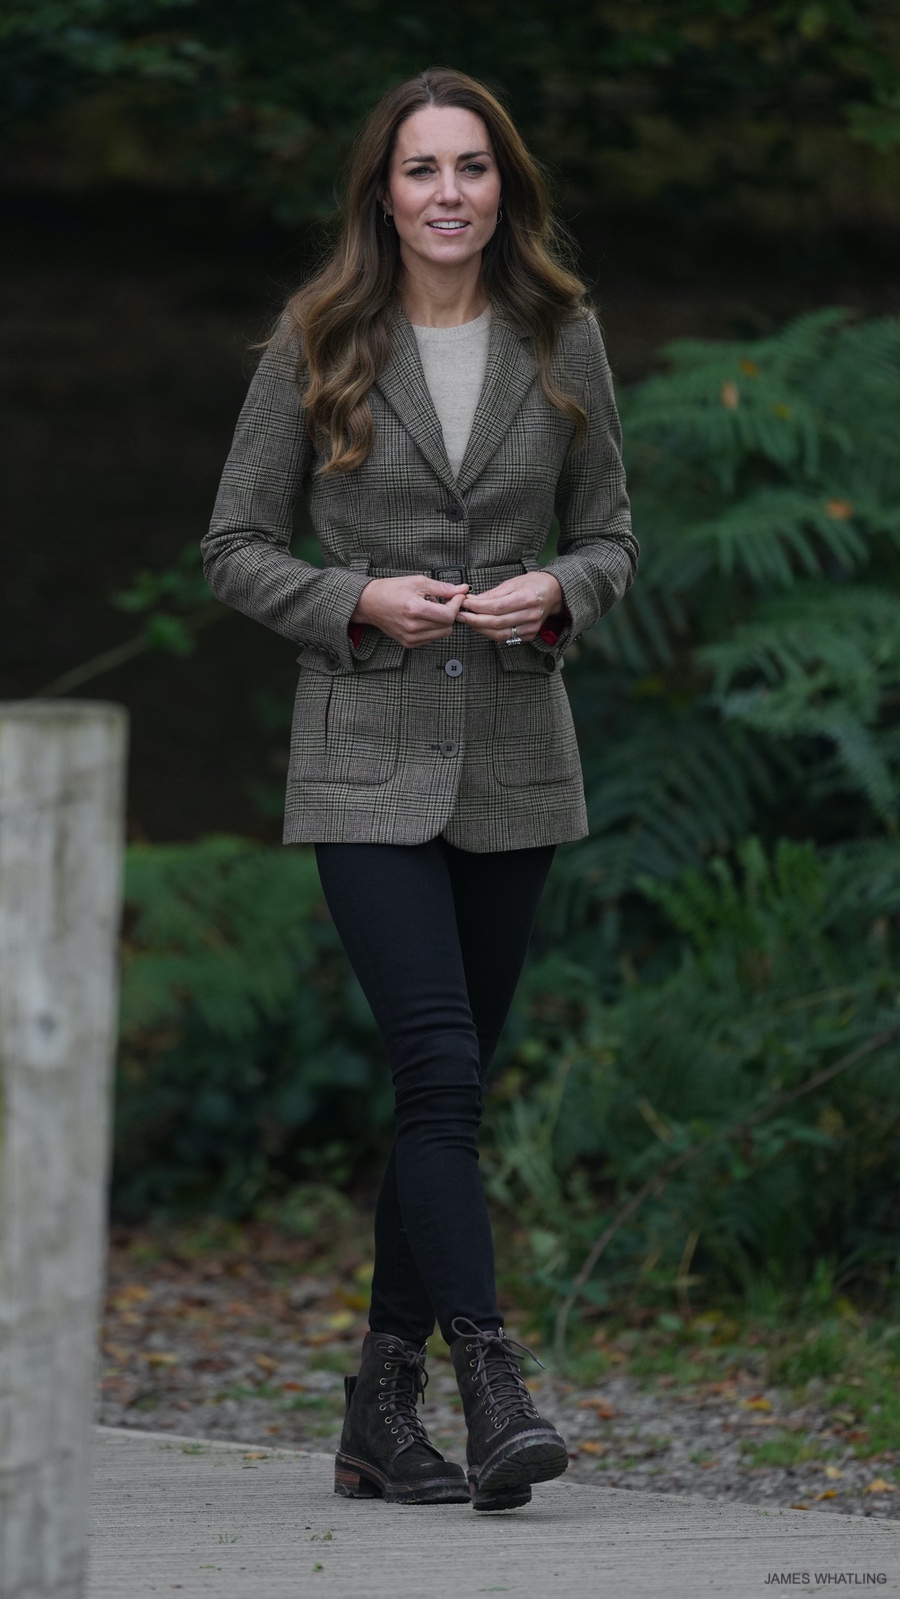 Kate Middleton dressed in a casual outfit during a visit to Cumbria in September 2021.  The Princess paired her brown combat boots with skinny jeans and a longline jacket.